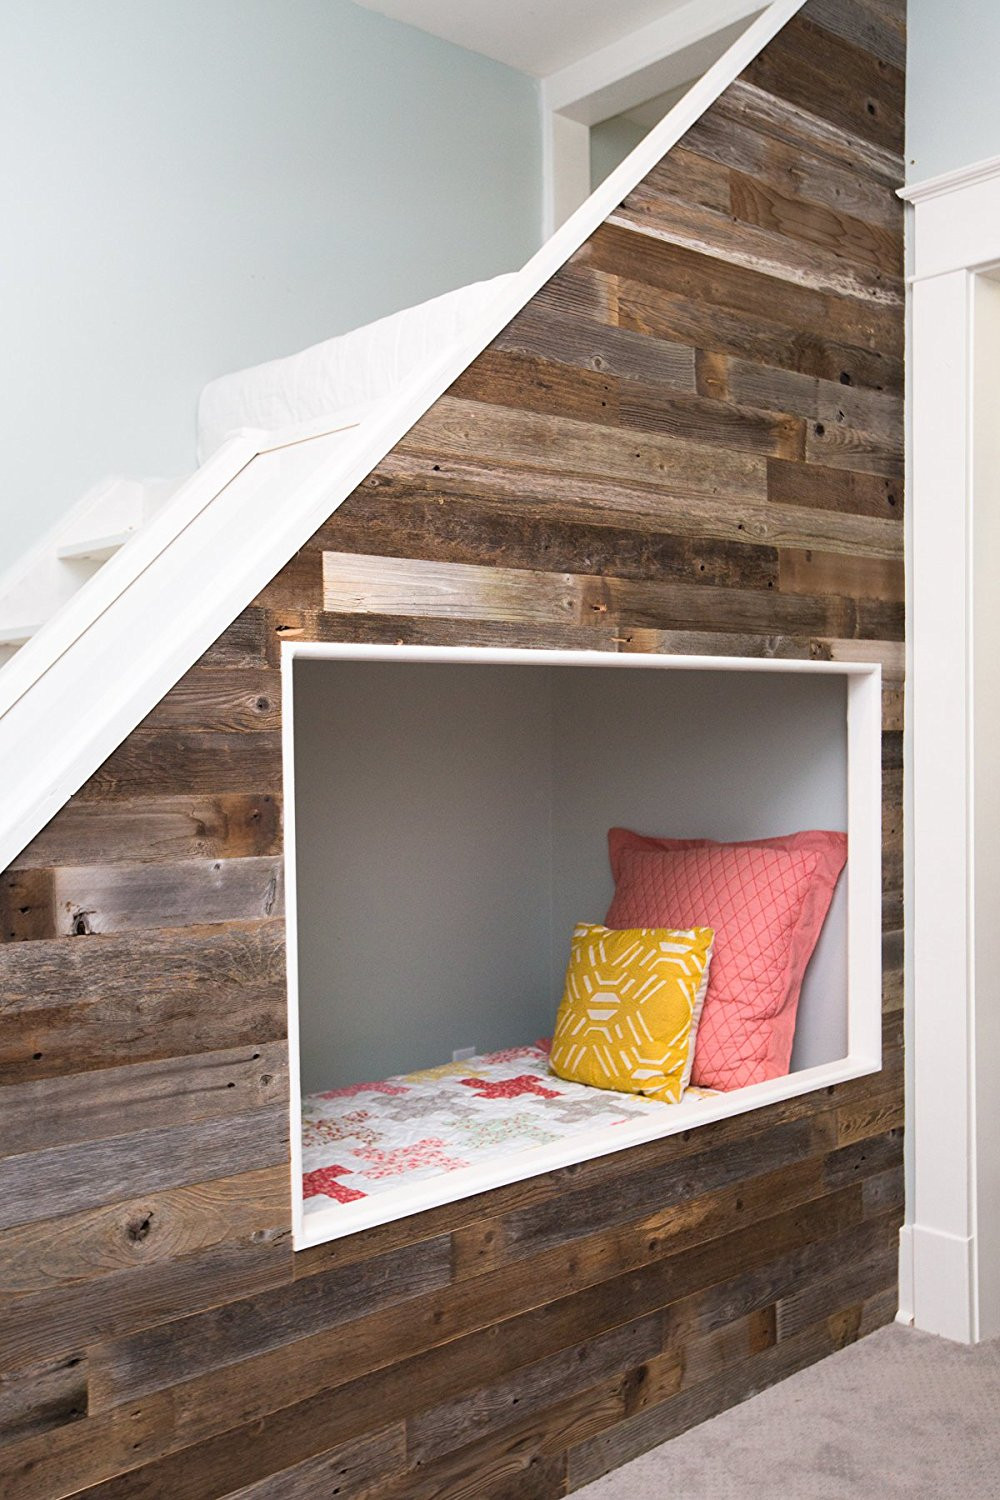 DIY Wood Plank Wall
 DIY Reclaimed Barn Wood Wall Just peel and stick to apply